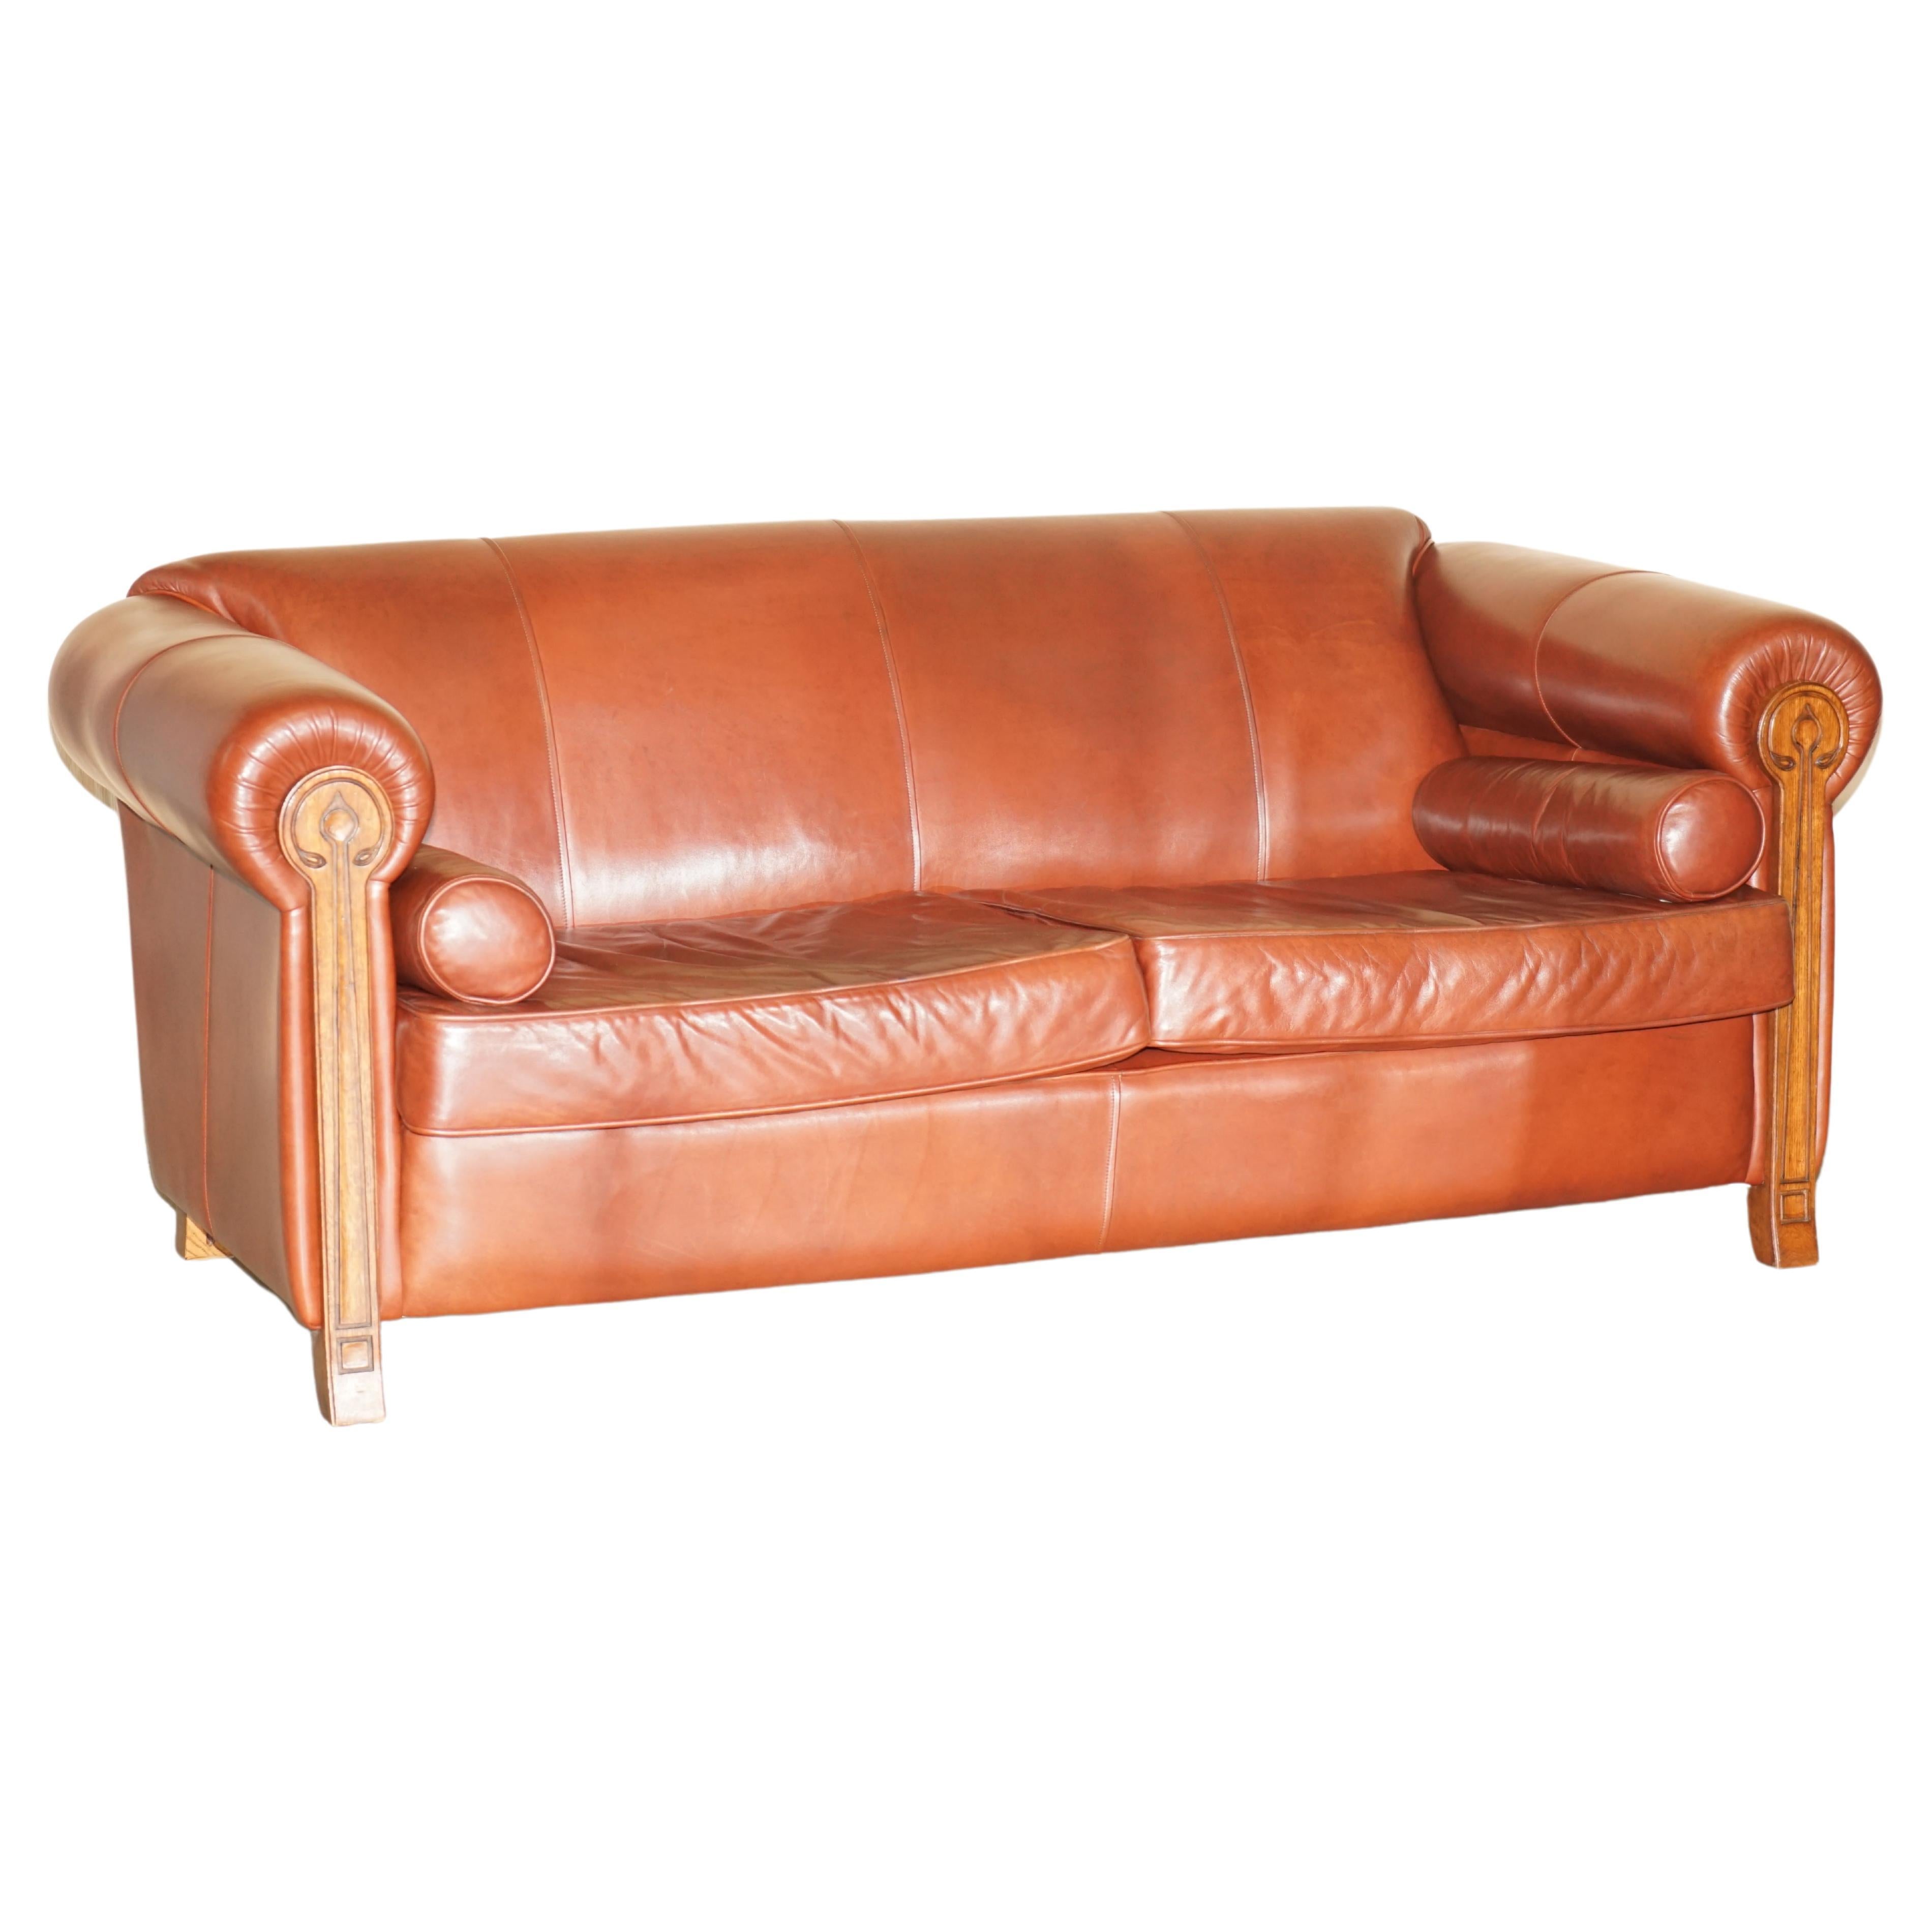 ViNTAGE CHESTNUT BROWN LEATHER LIBERTY'S ART NOUVEAU CLUB SOFA CARVED WOOD FRAMe For Sale